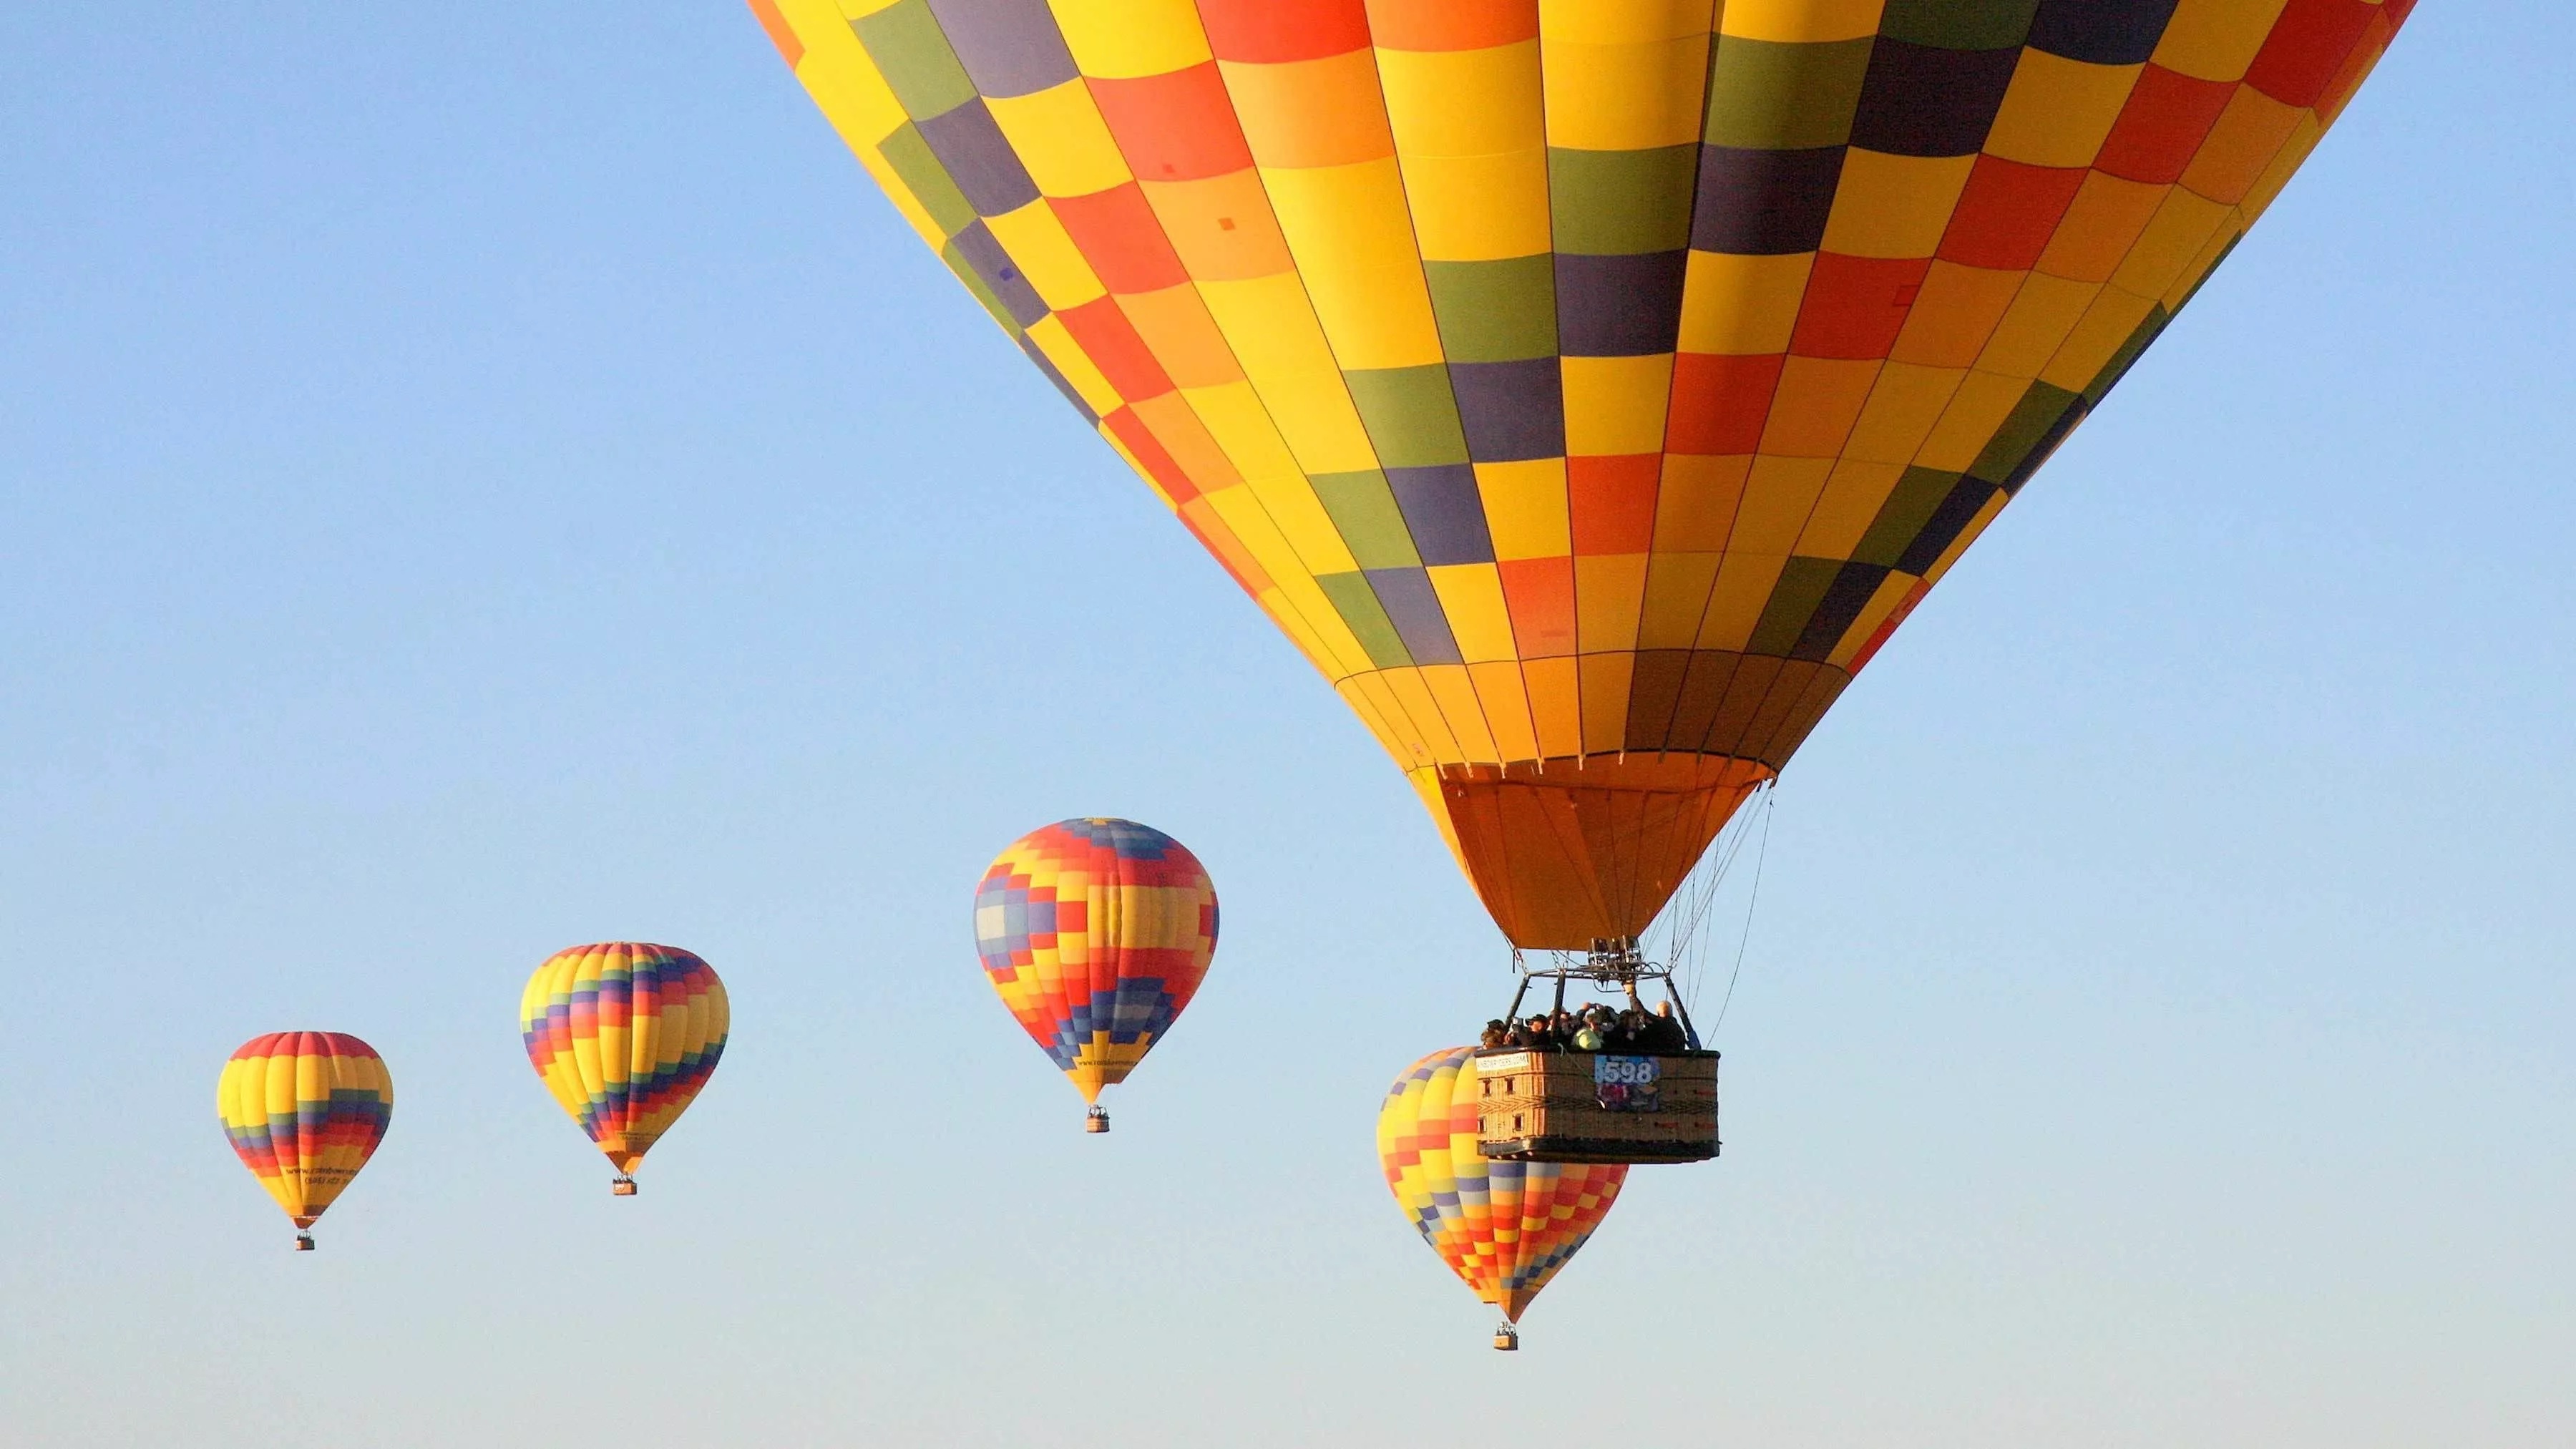 Ballooning MX in Mexico, North America | Hot Air Ballooning - Rated 1.1